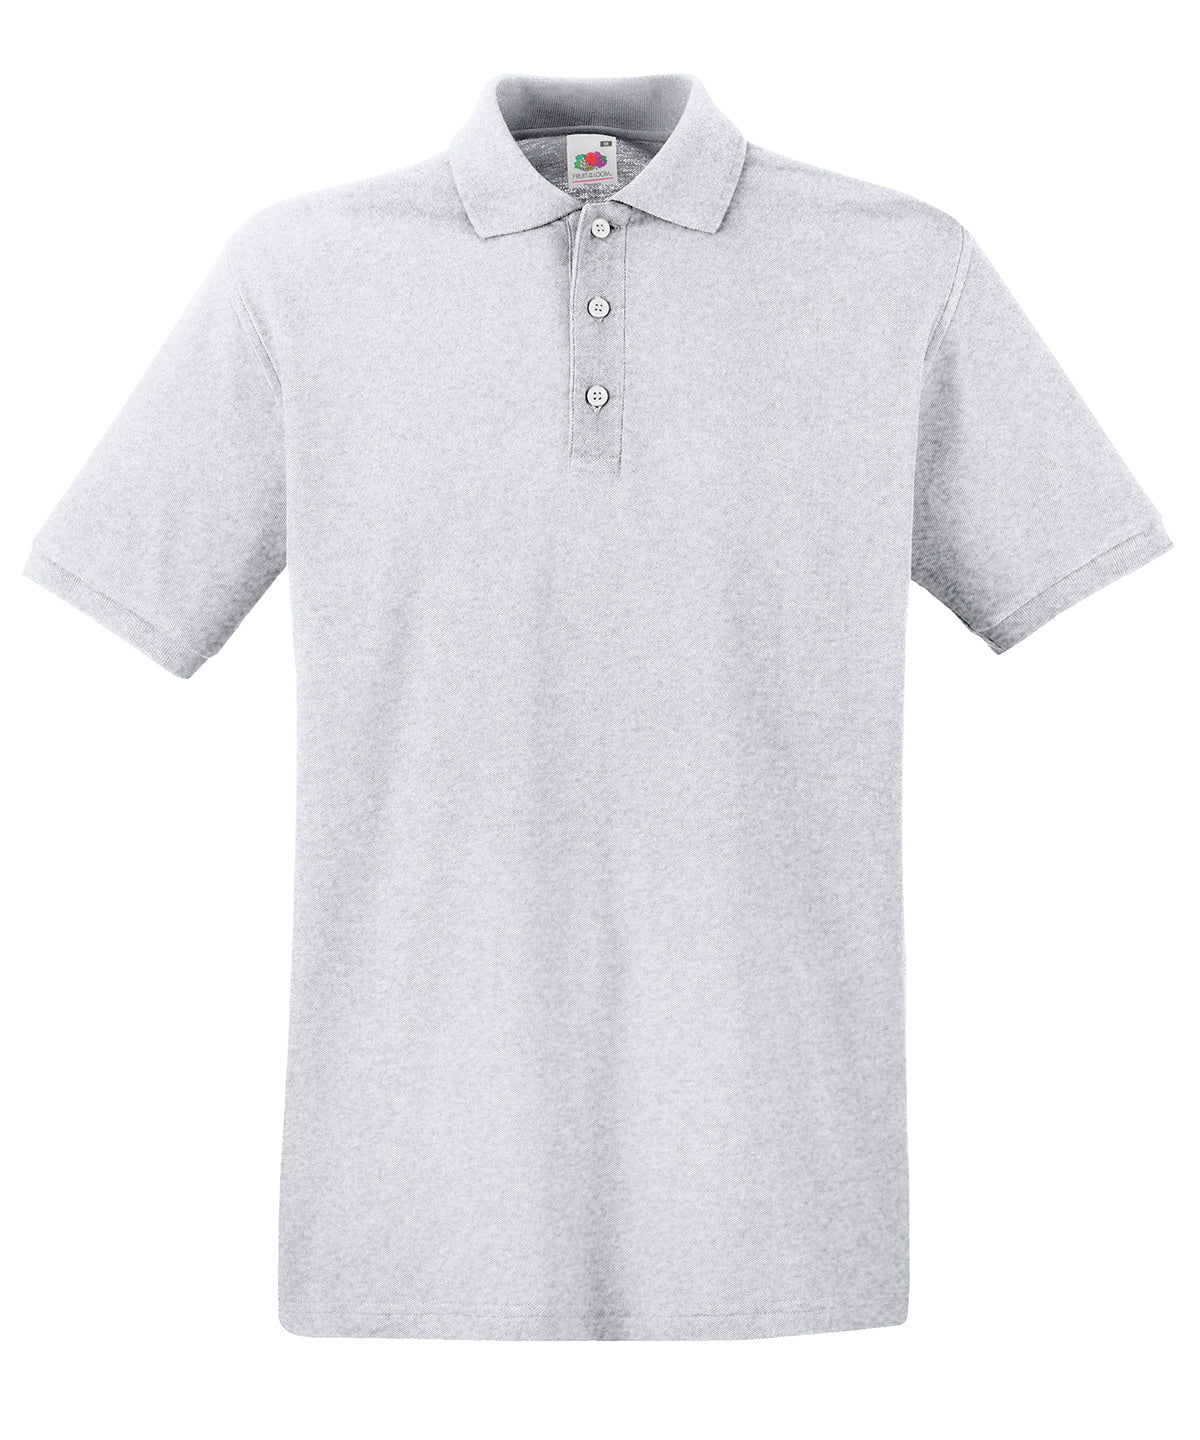 Personalised Polo Shirts - Heather Grey Fruit of the Loom Premium polo